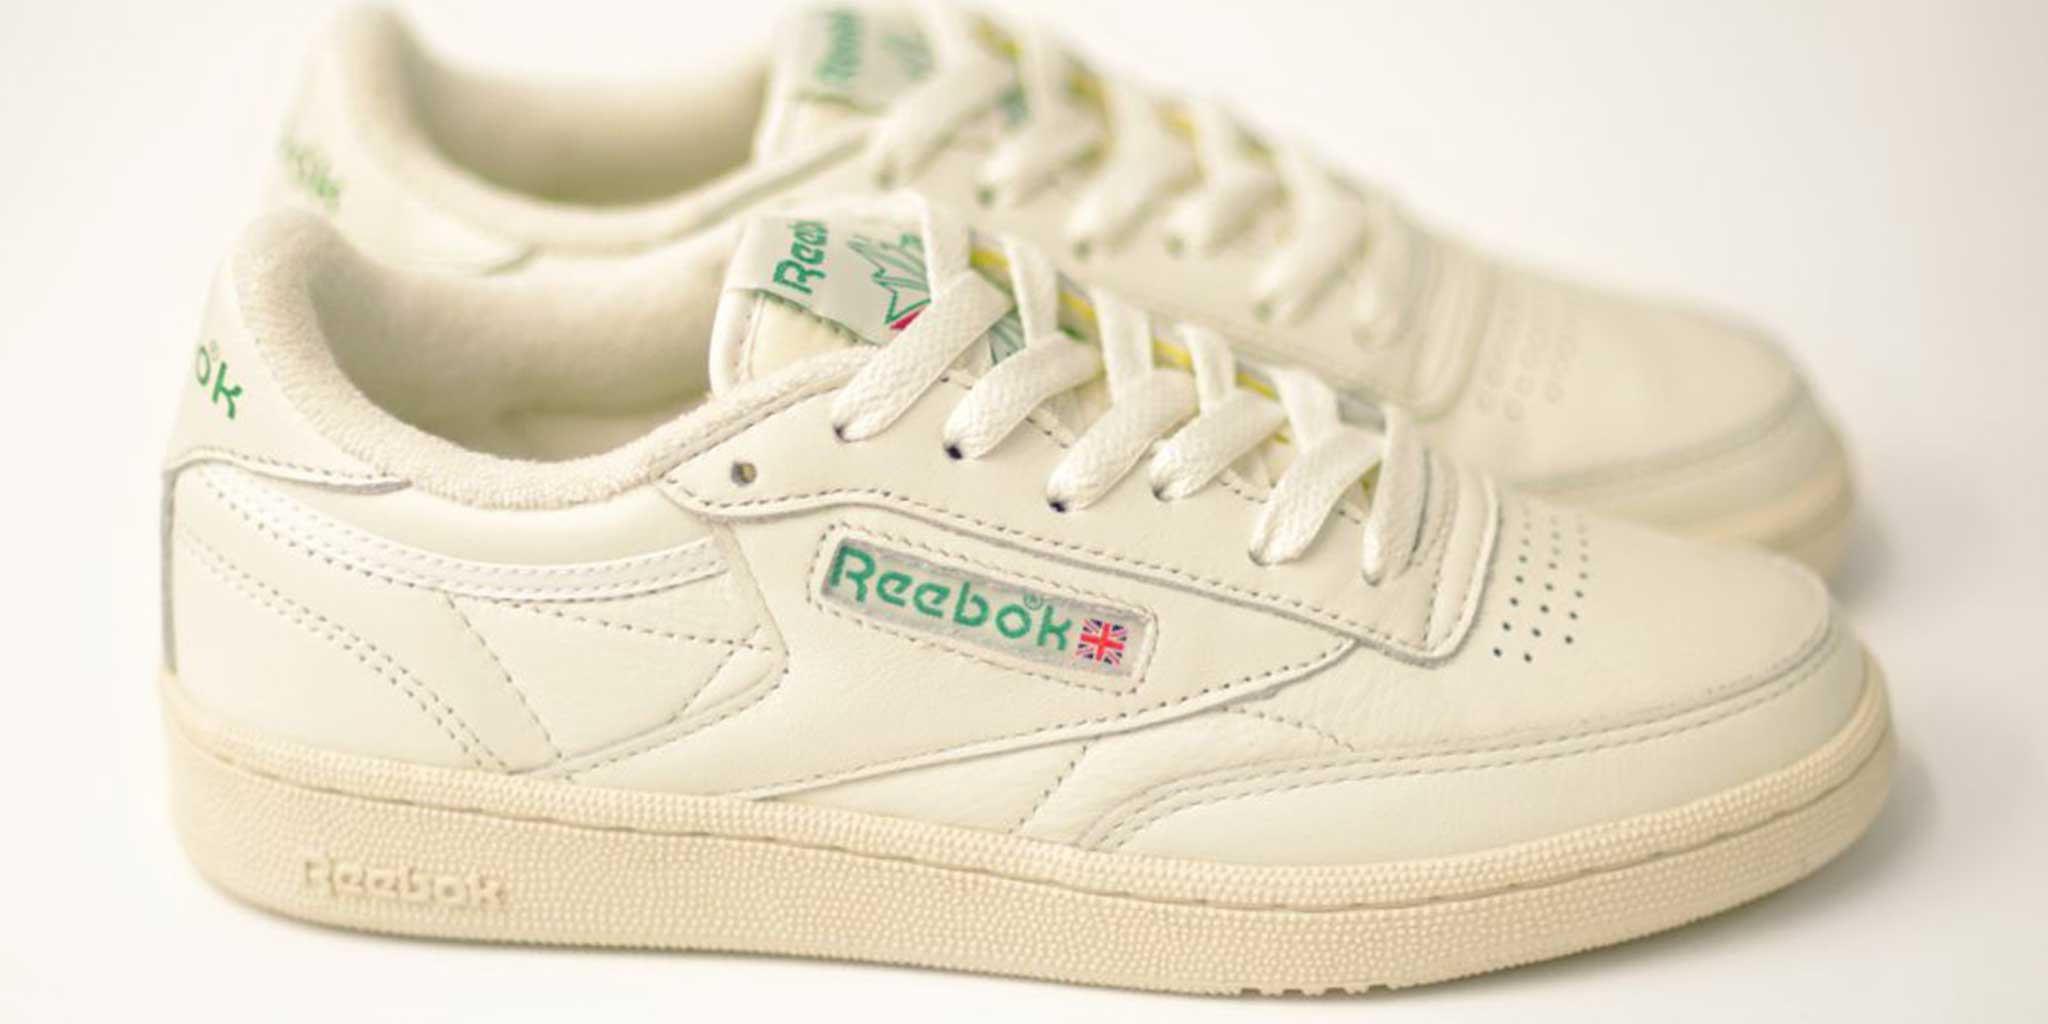 Reebok Club c 85 Vintage in Athletic Blue and Glen Green - pam pam